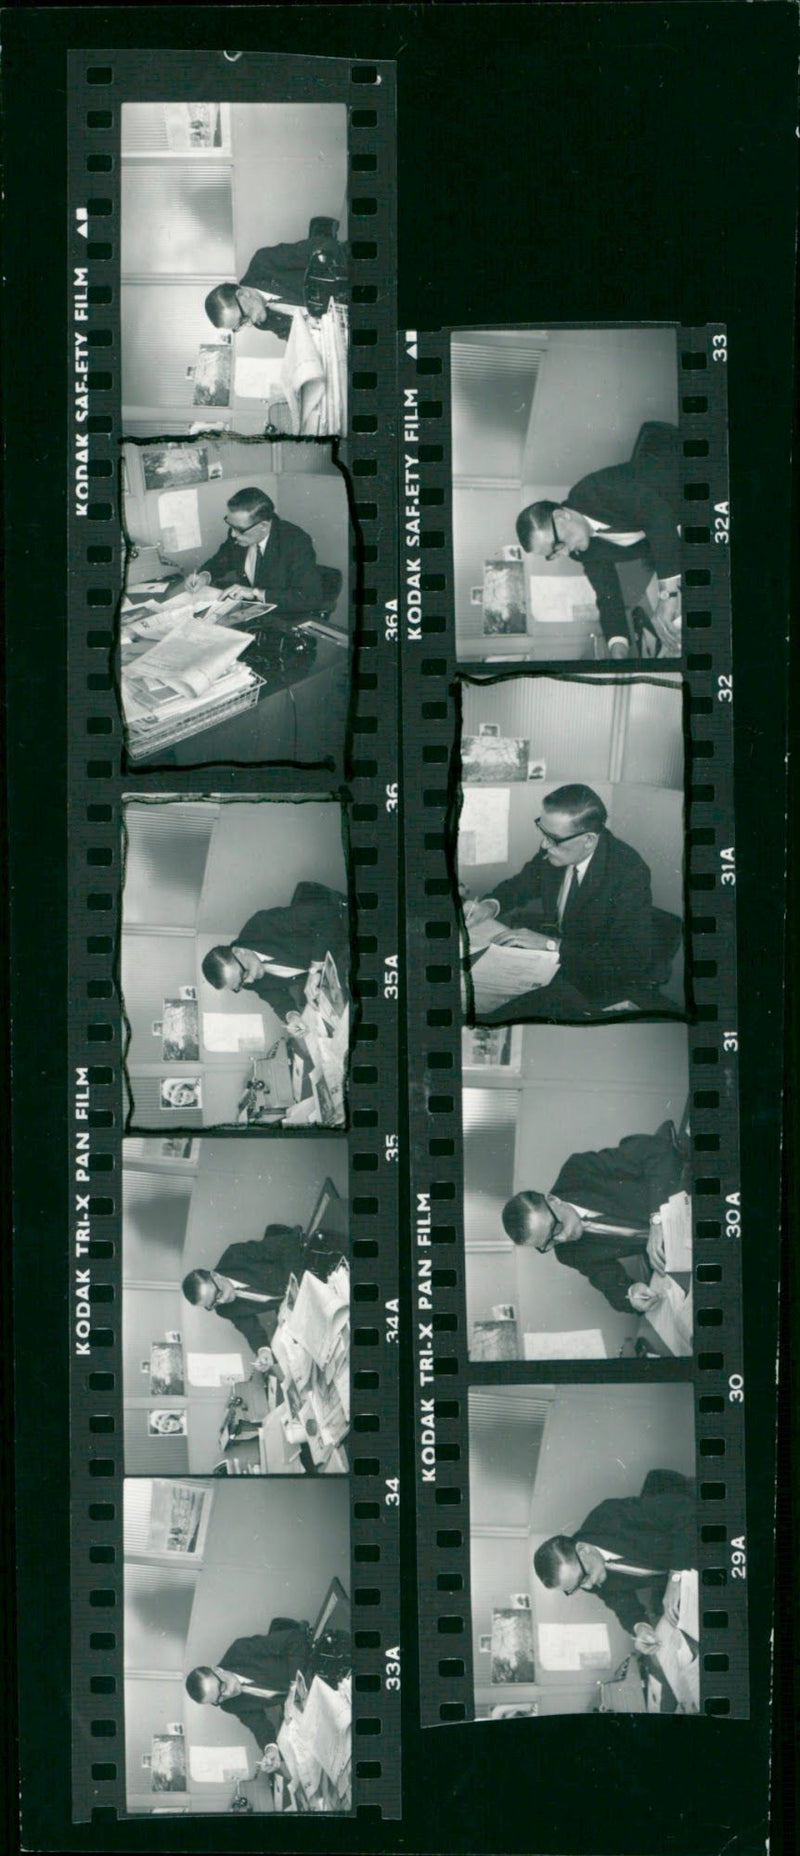 BAILY KEN PEOPLE STAFF - NUMBER GALERY AGENT, FILM - Vintage Photograph